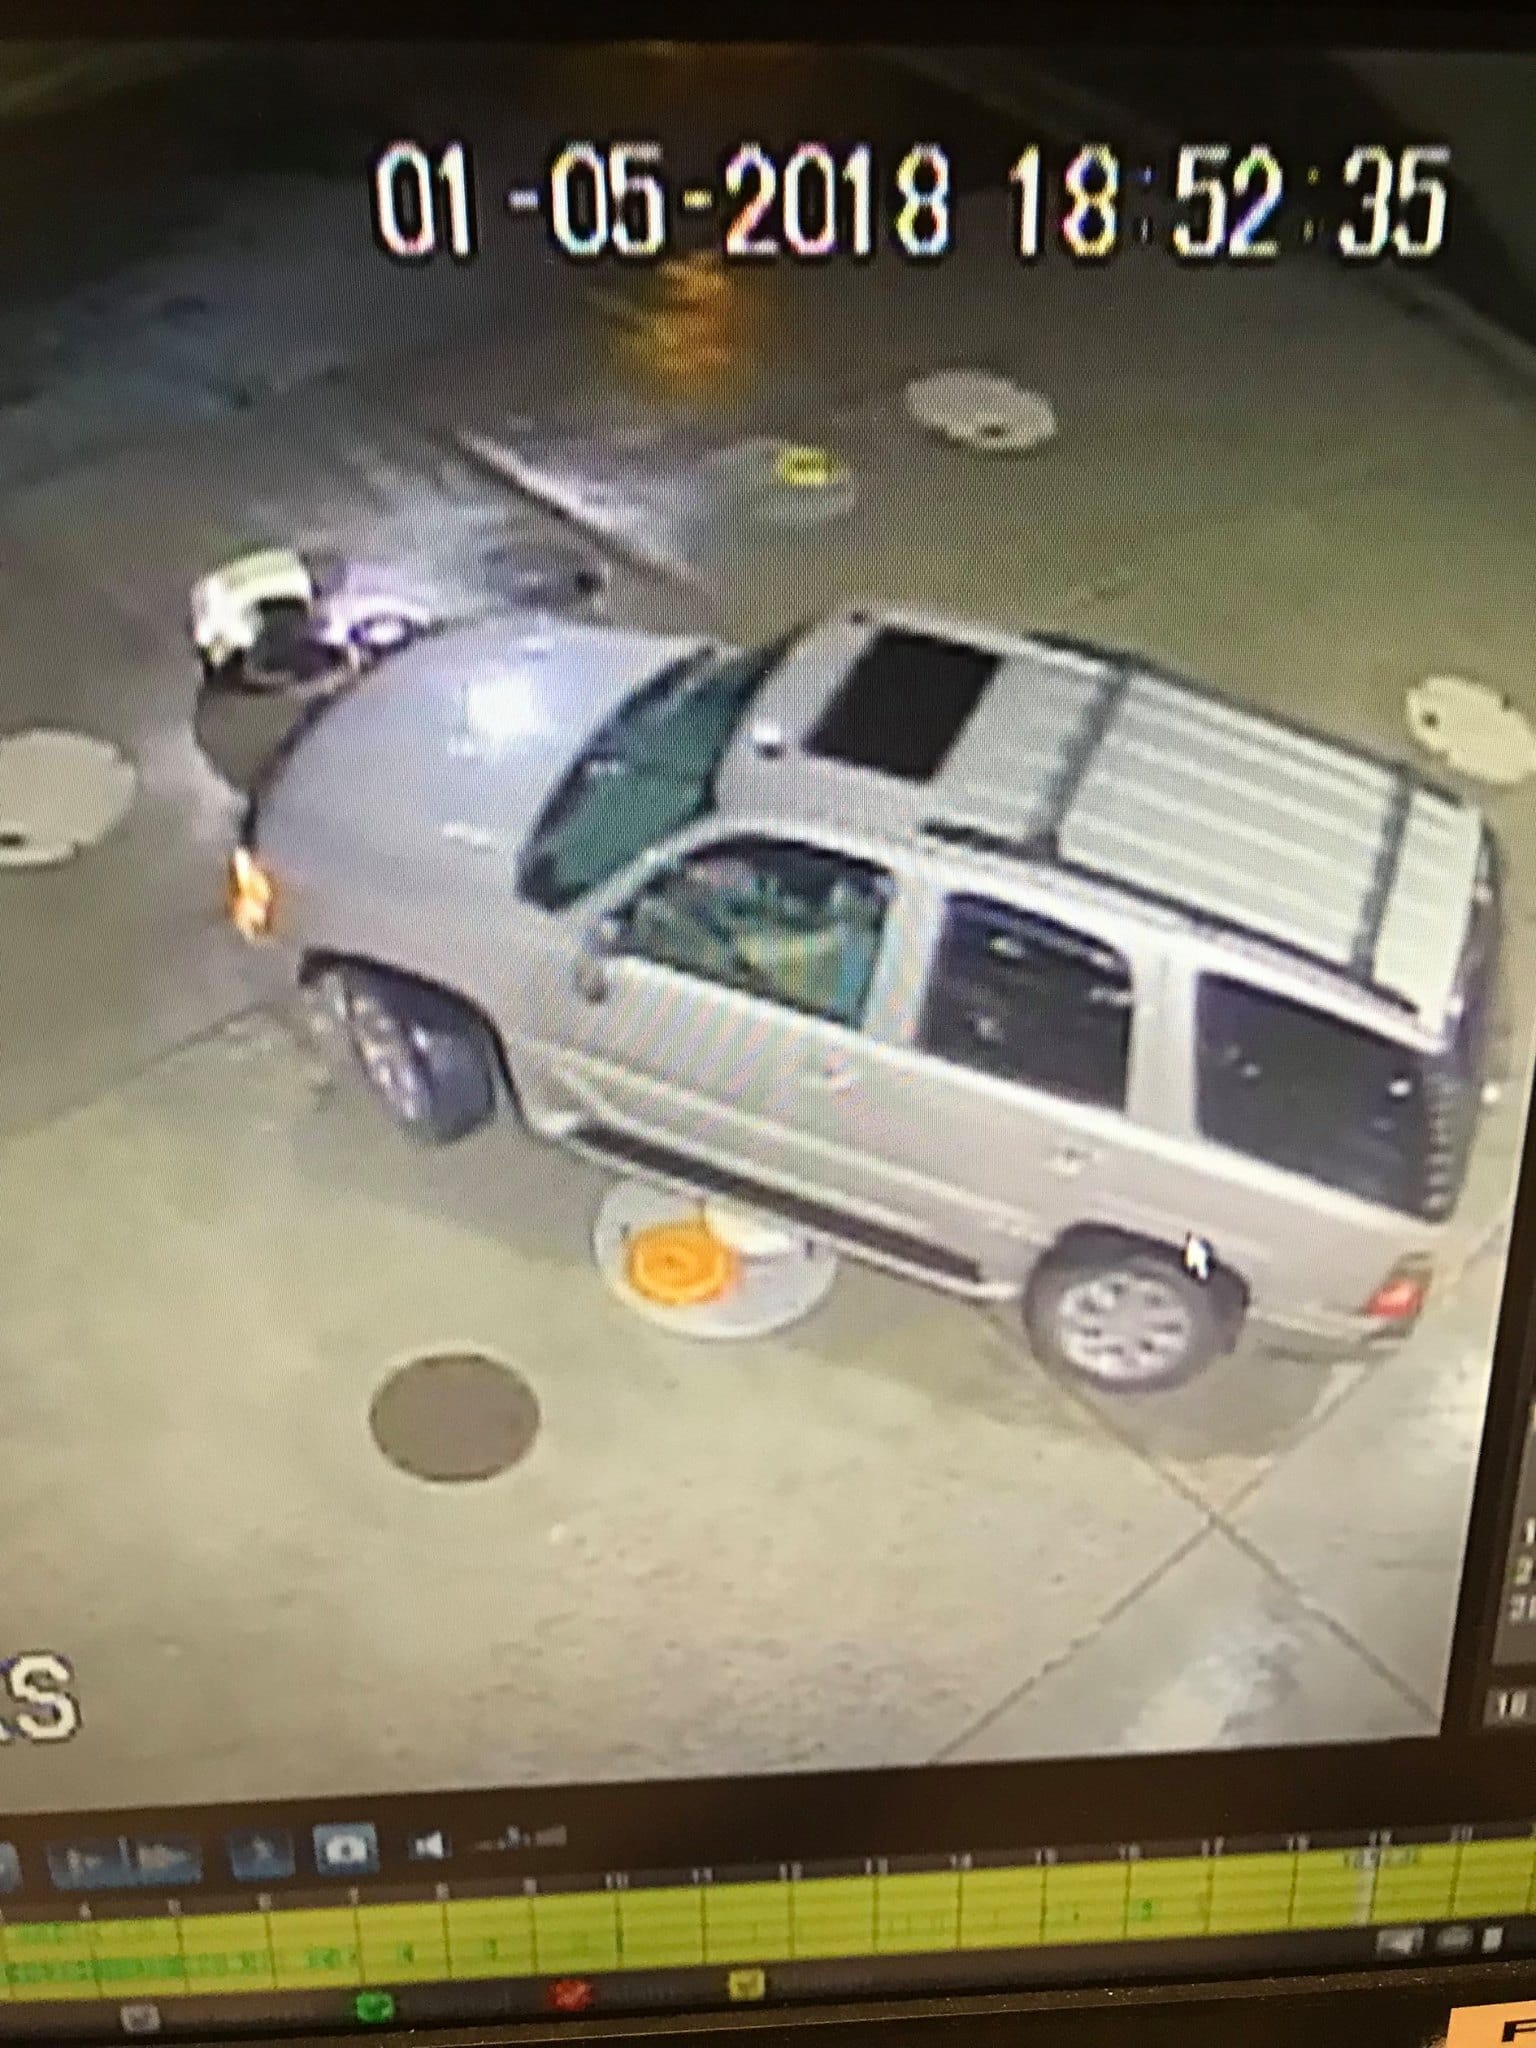 The Clark County Sheriff's Office says a man driving this SUV struck and ran over a Fred Meyer gas station employee off Highway 99 on Jan. 5.